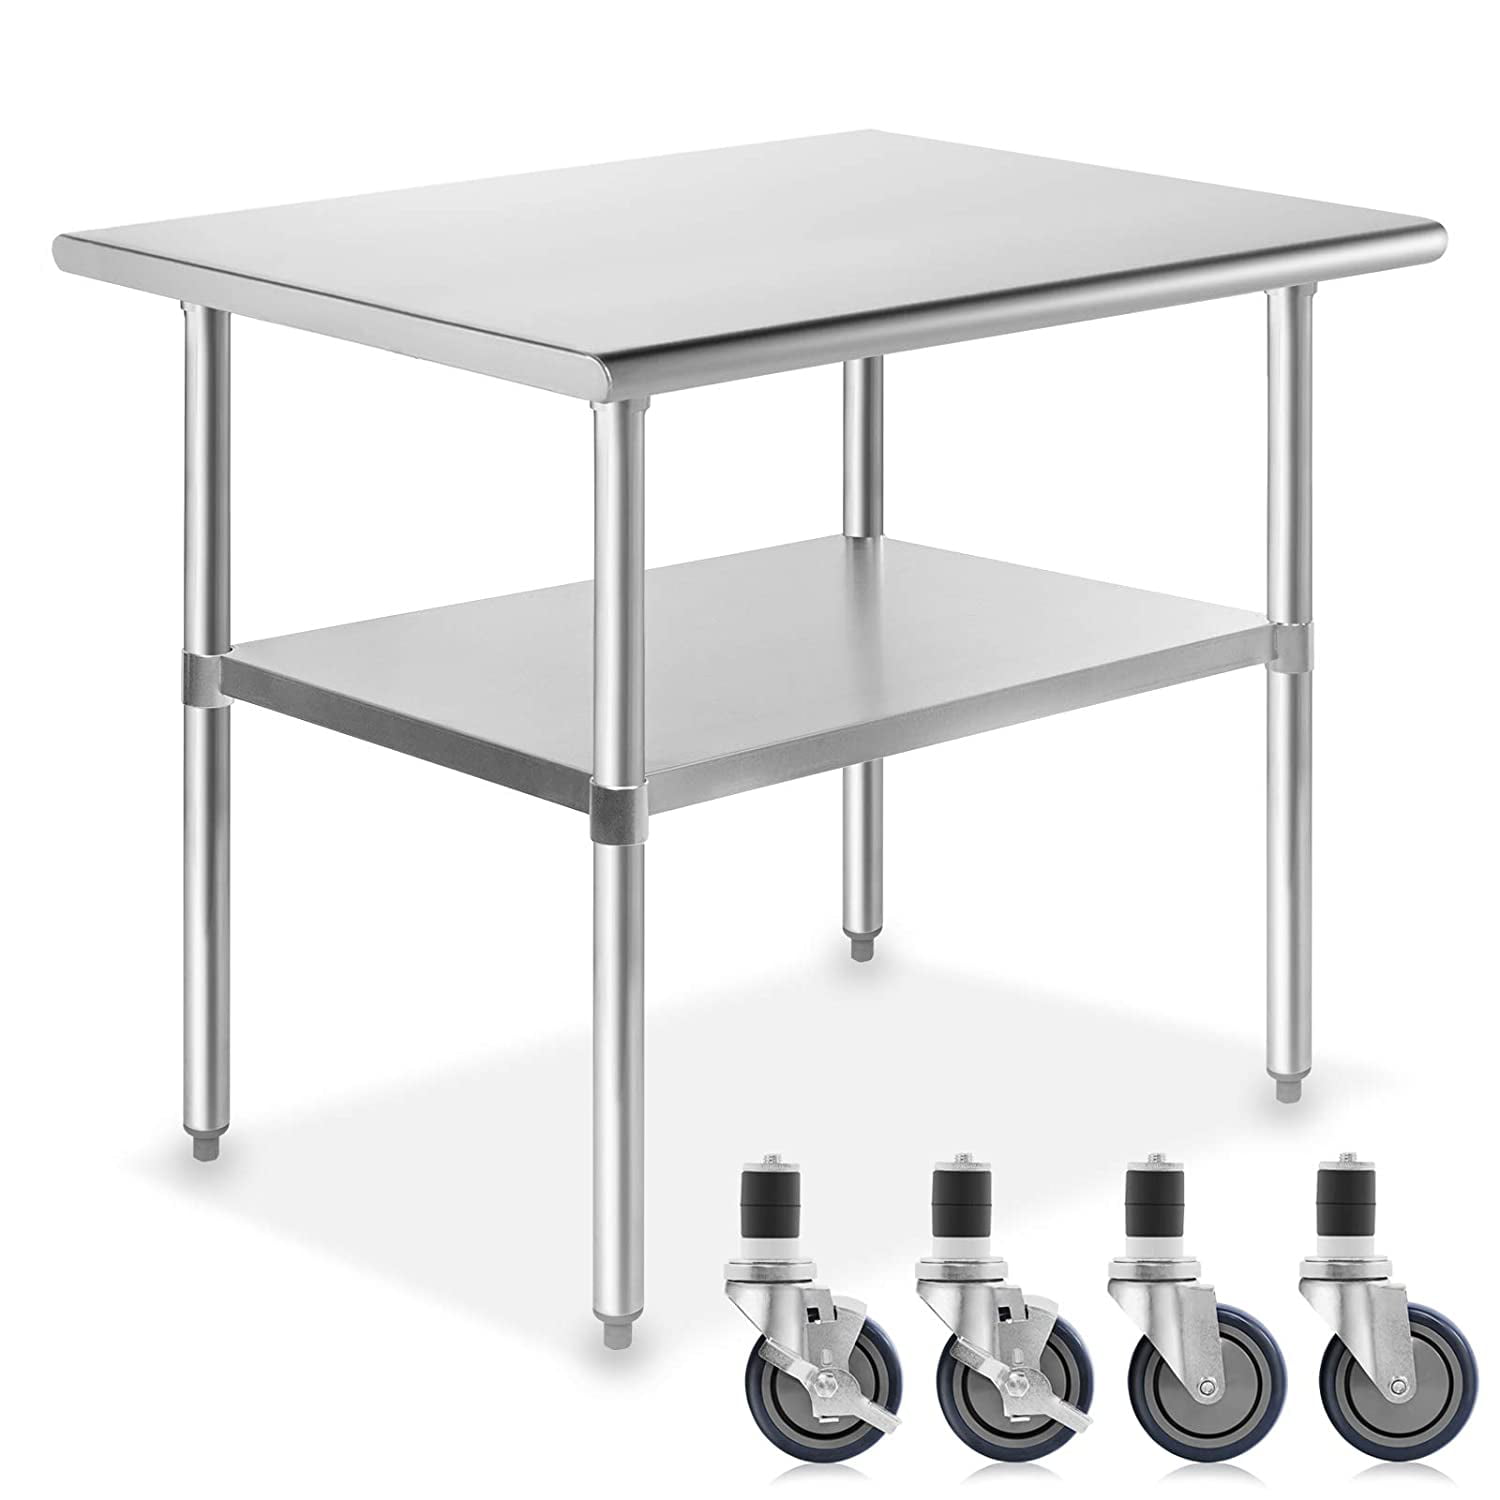 NSF Stainless Steel Commercial Kitchen Prep & Work Table w/ 4 Casters Stainless Steel Prep Table With Wheels